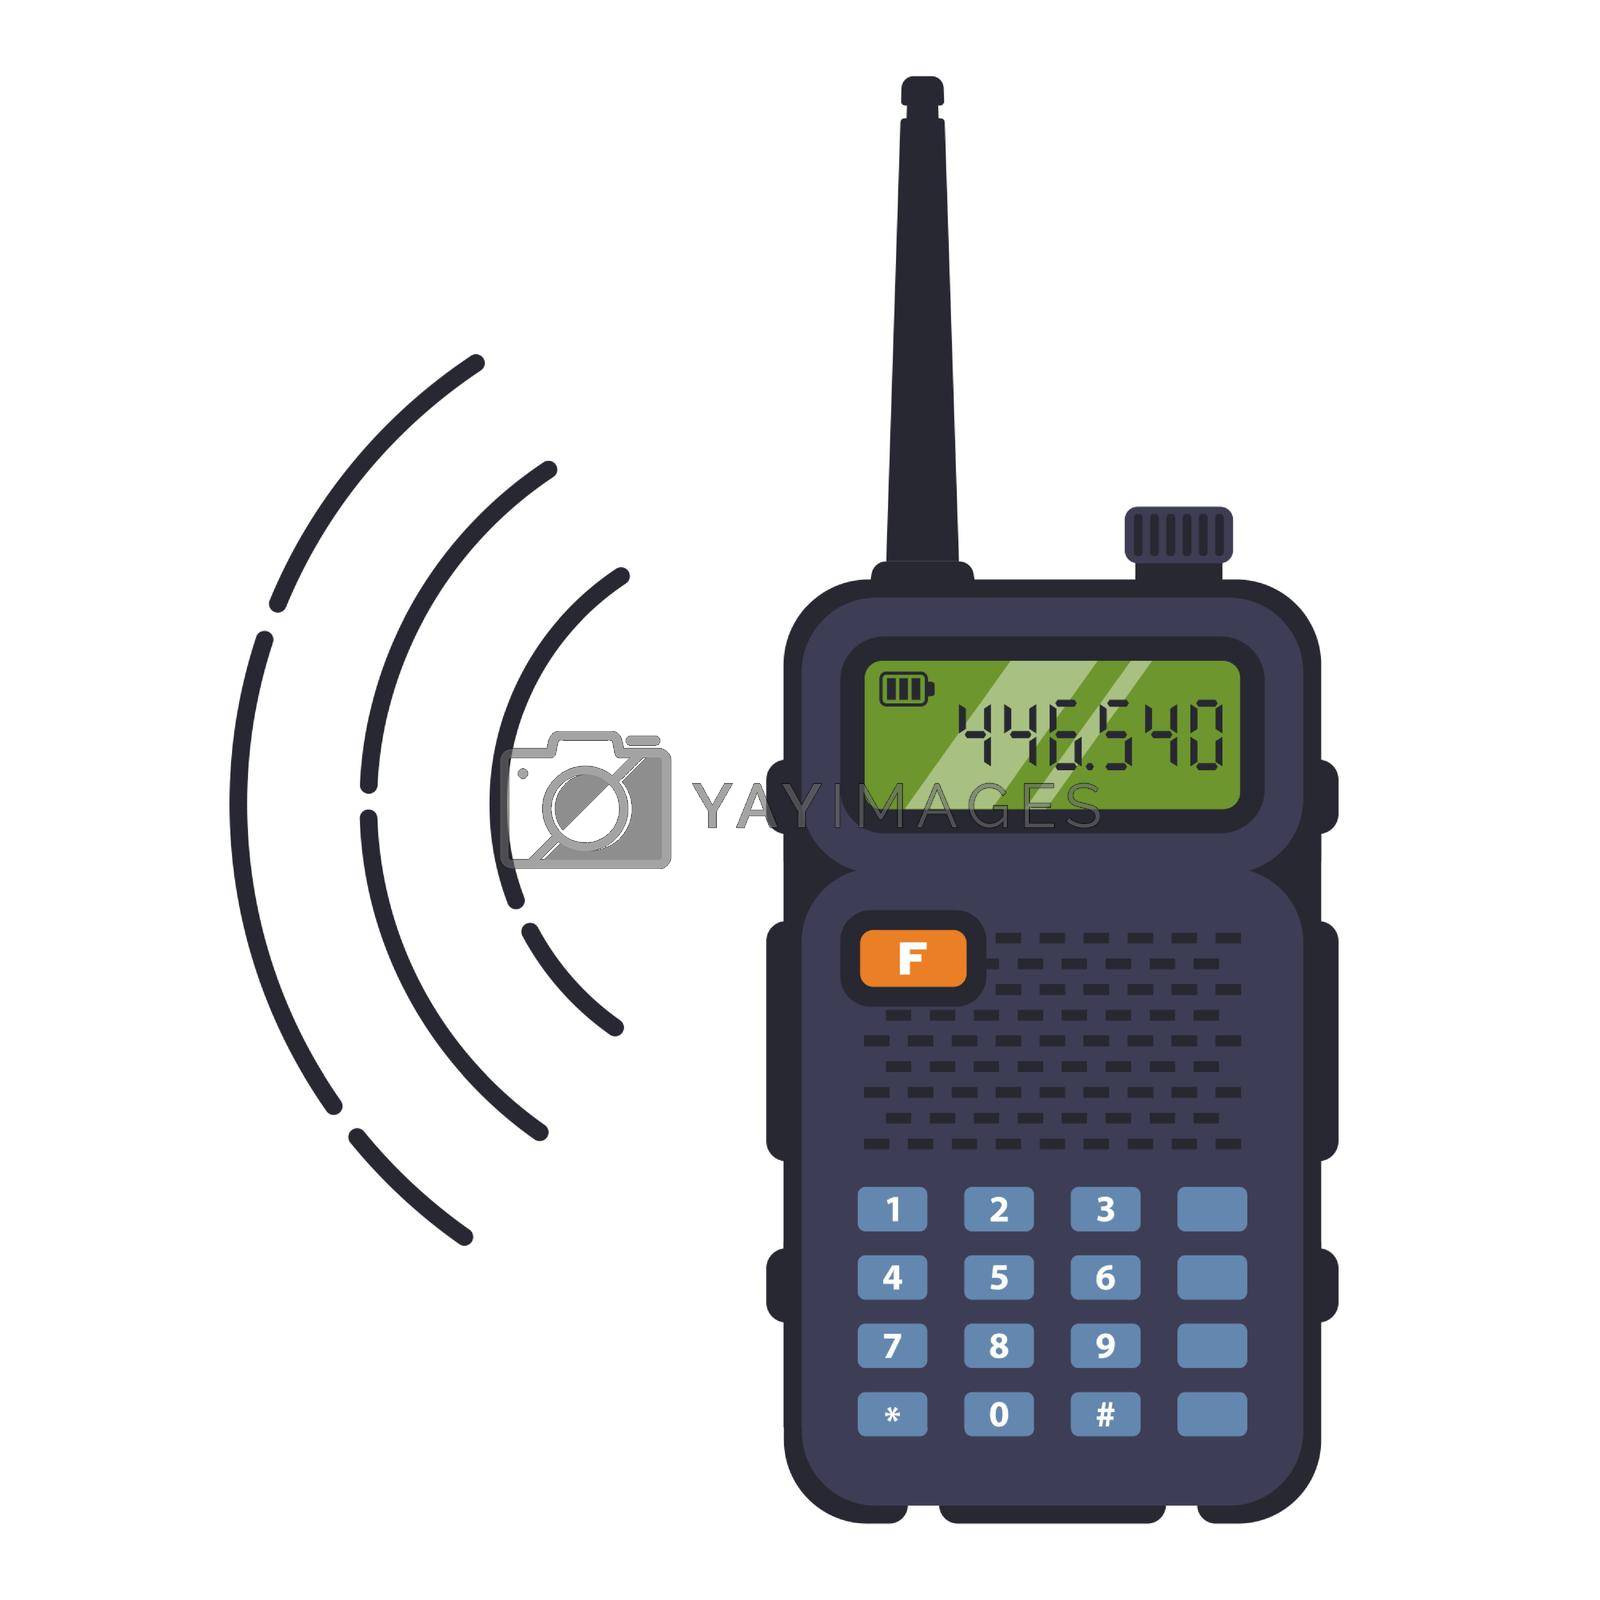 black walkie-talkie with antenna for communication over a distance. catch the signal from the radio. flat vector illustration isolated on white background